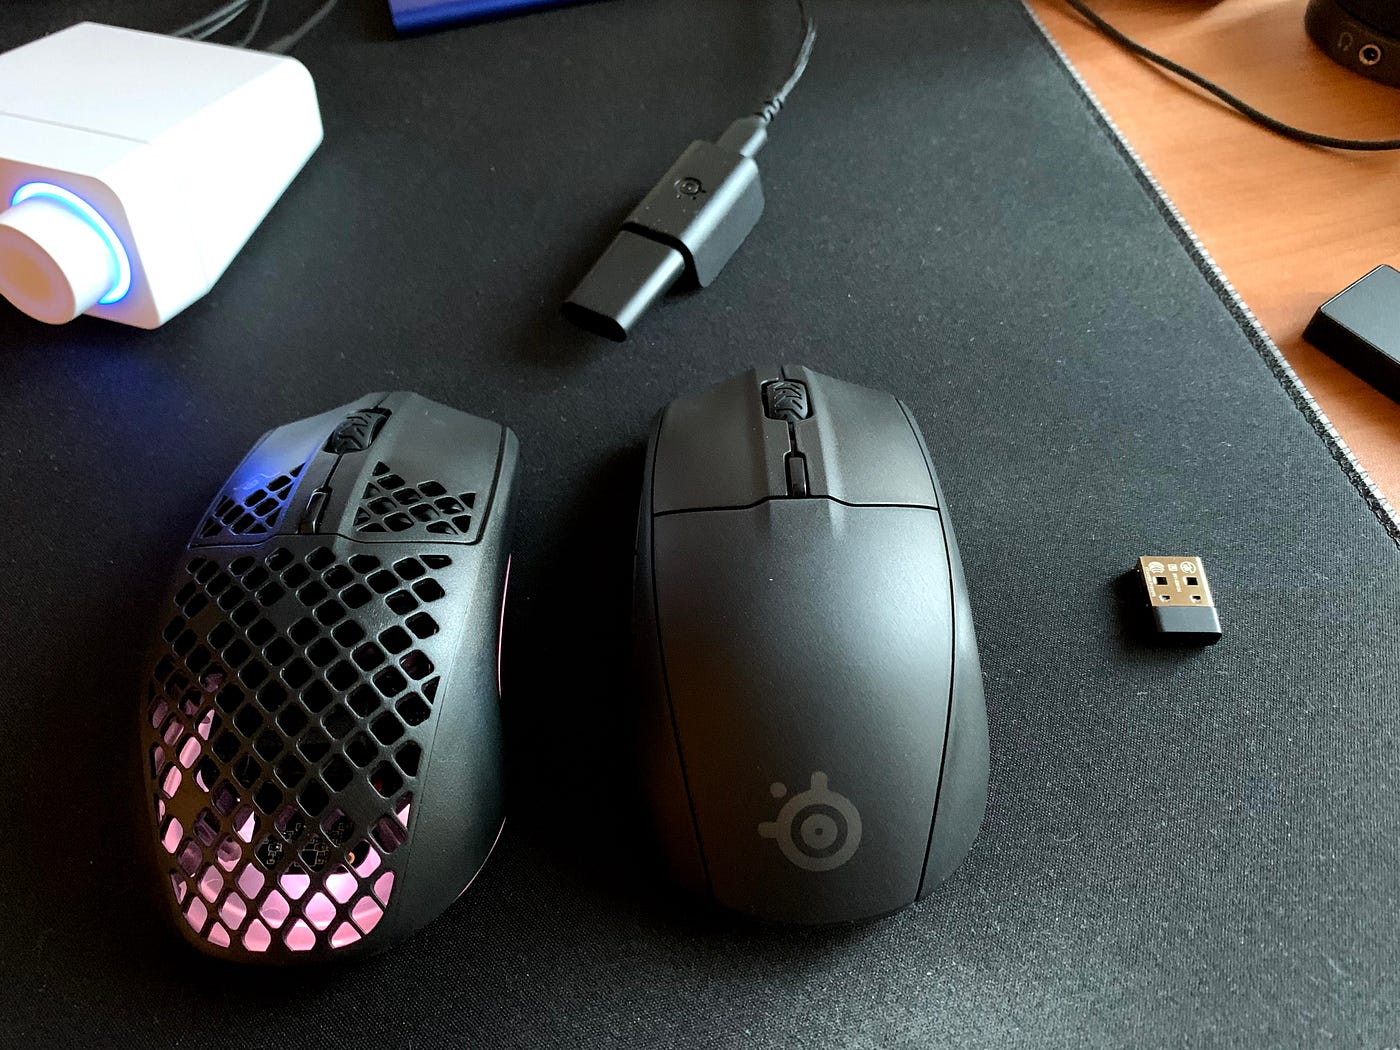 SteelSeries Rival 3 Wireless Budget Gaming Mouse Review